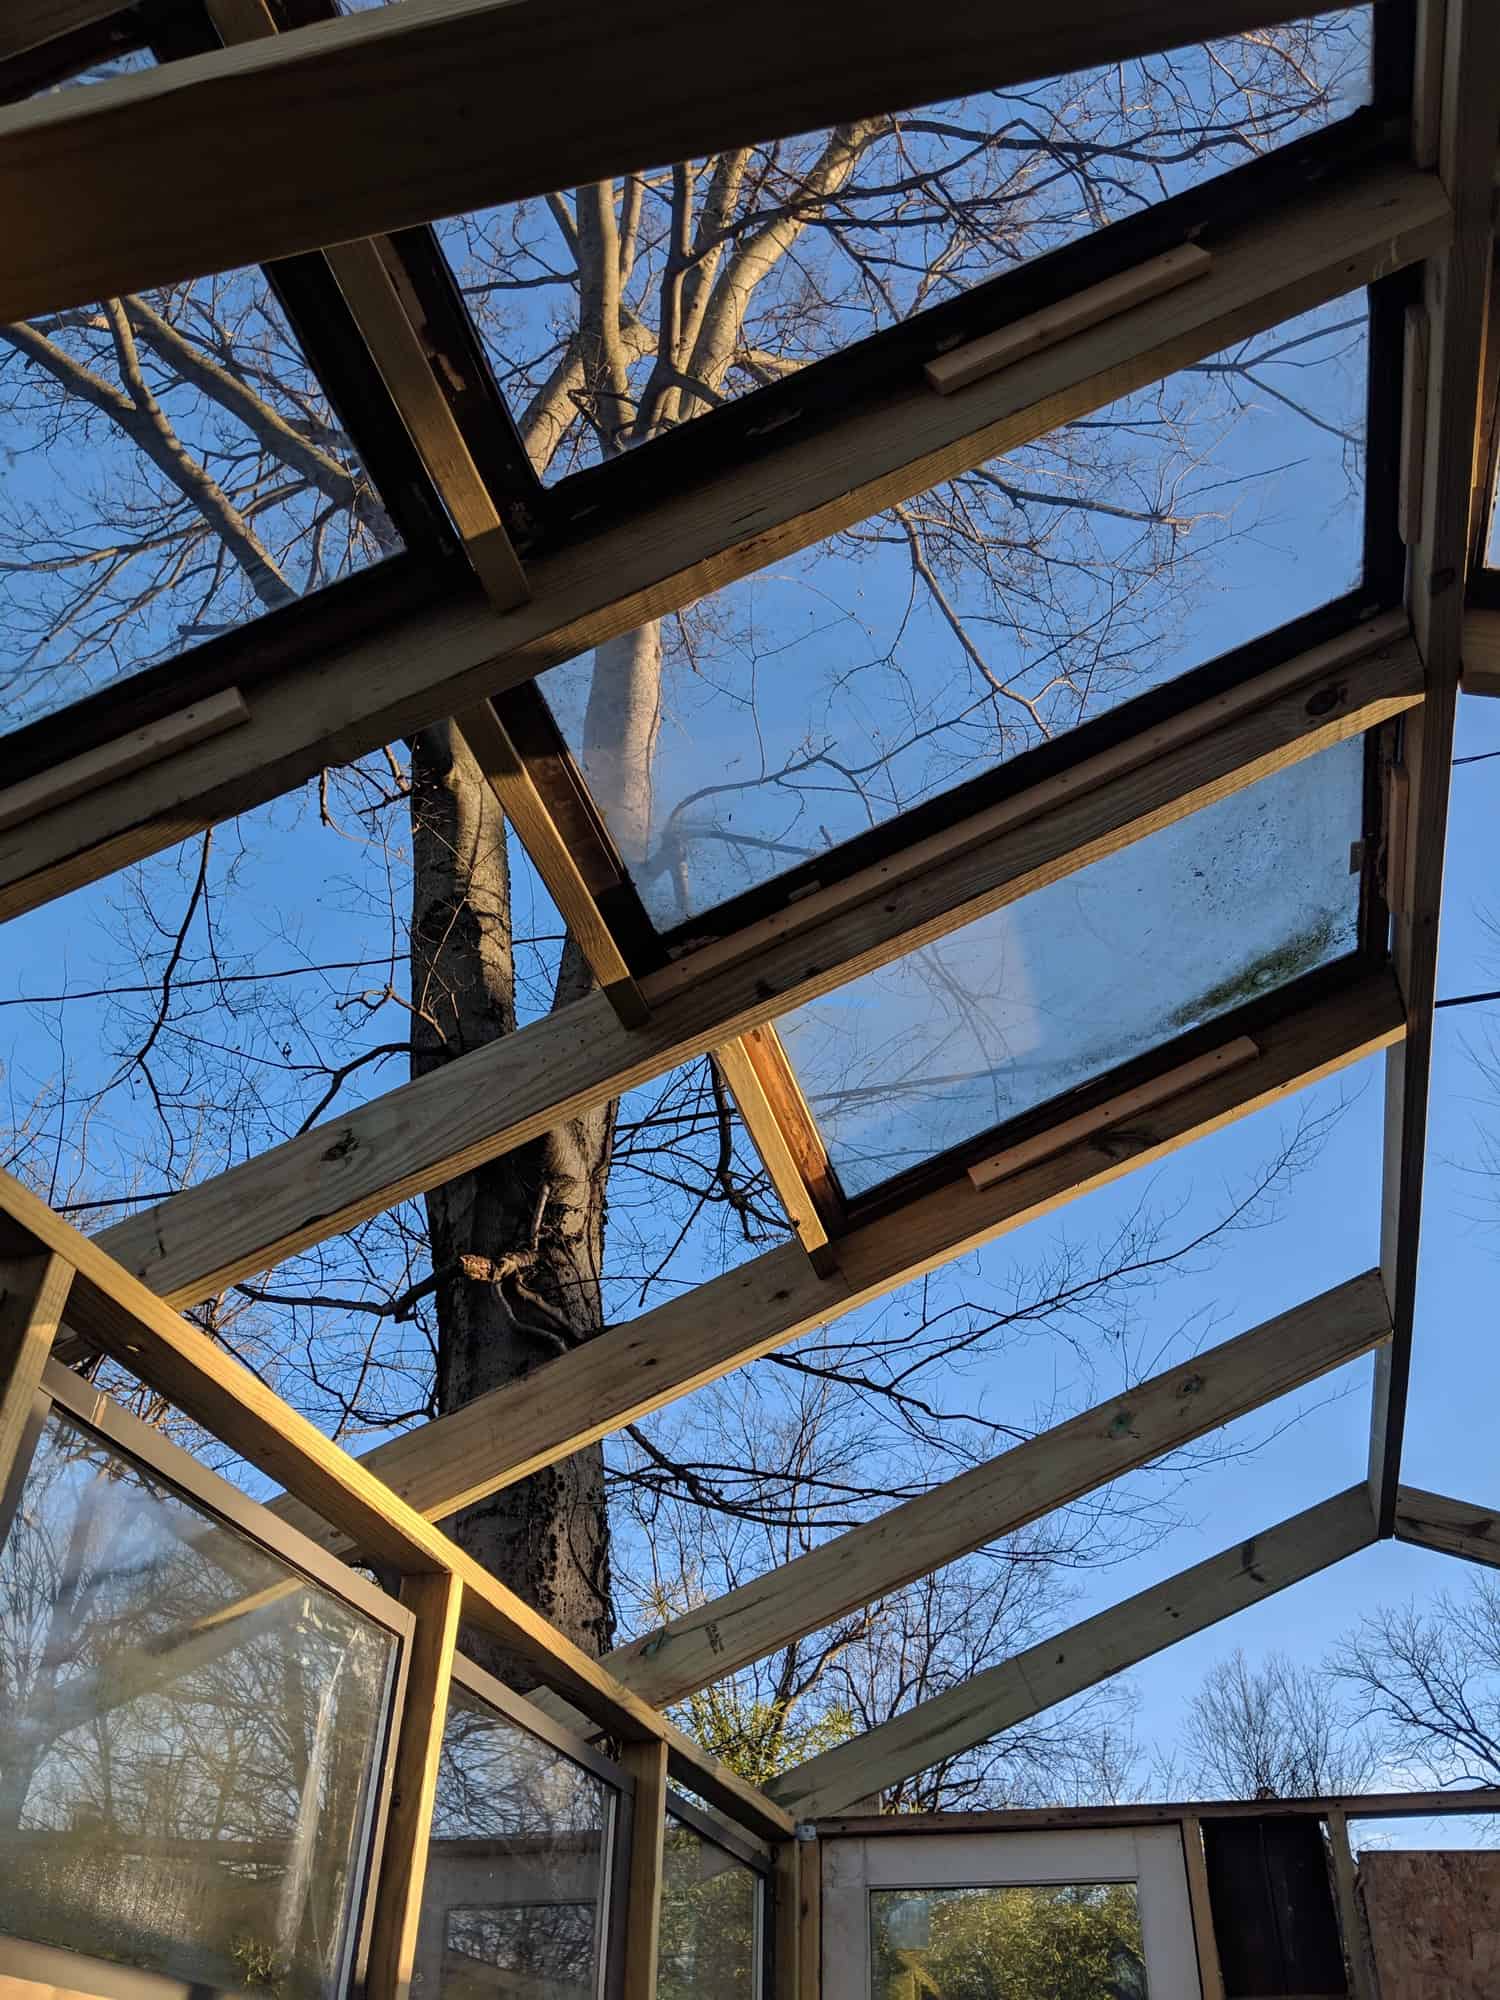 view of ceiling of greenhouse from inside wooden frame